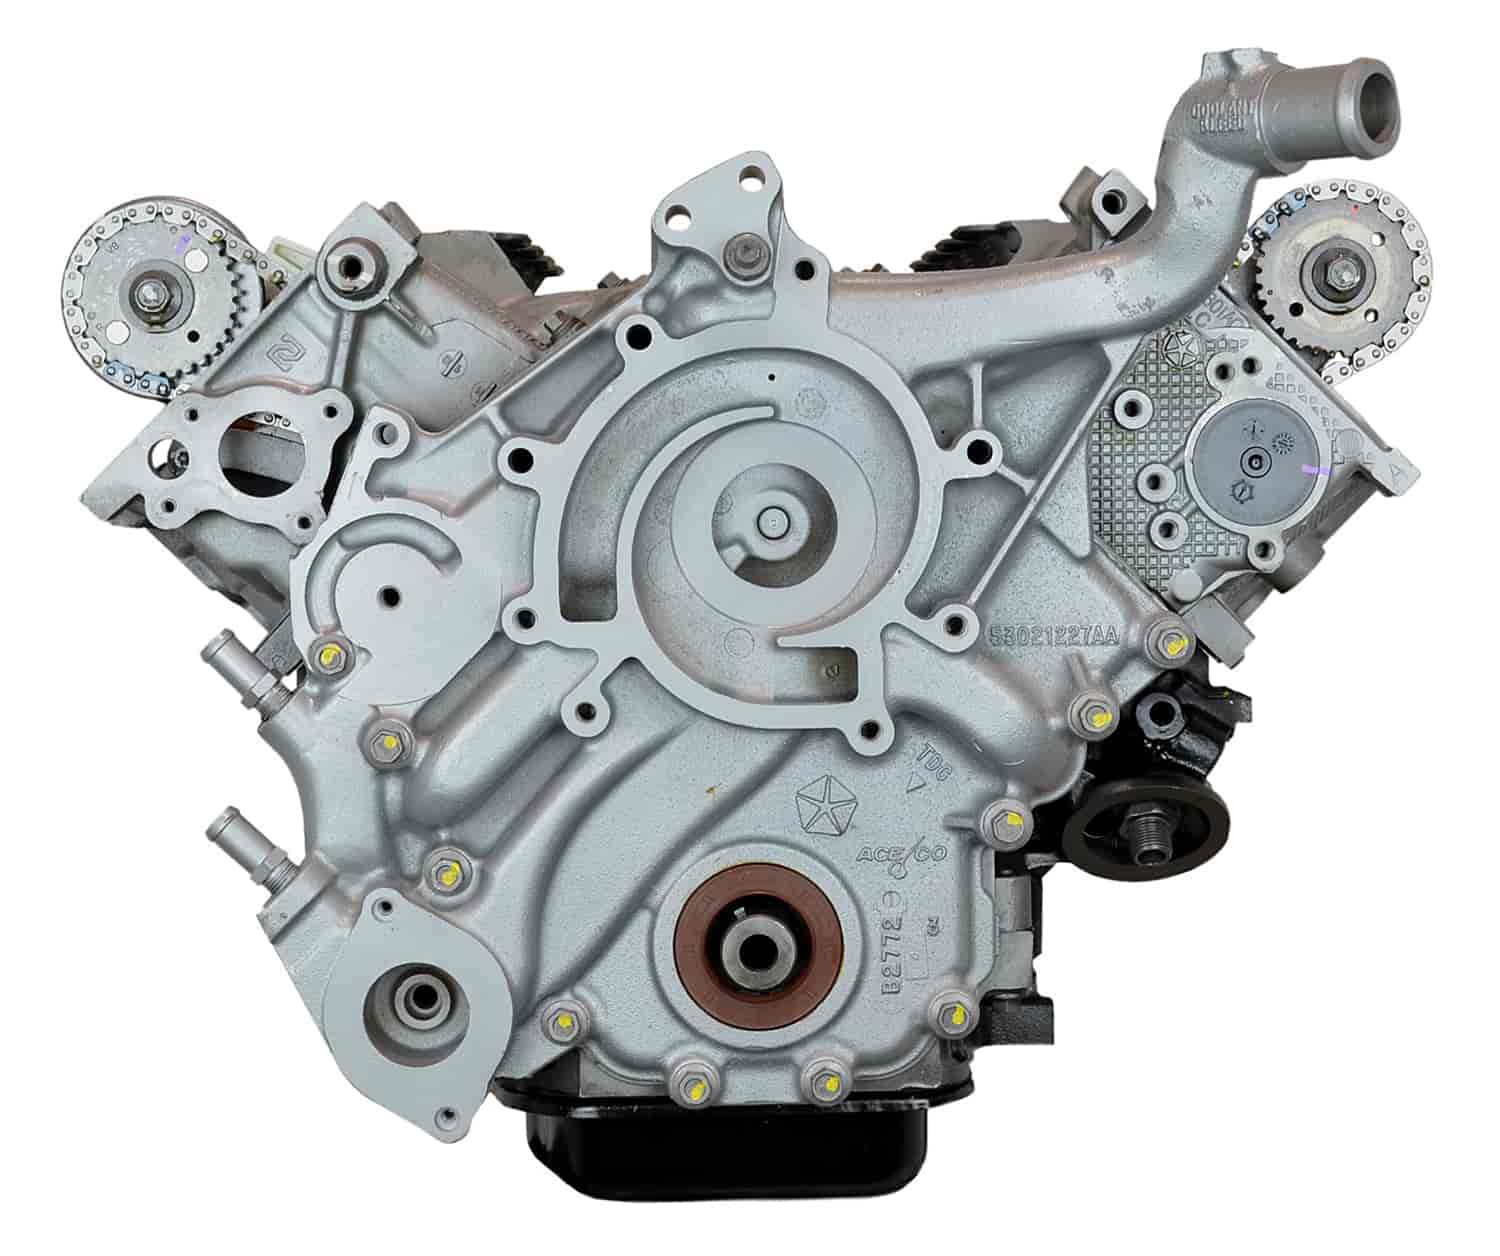 Remanufactured Crate Engine for 2004-2008 Dodge Ram Truck with 4.7L V8